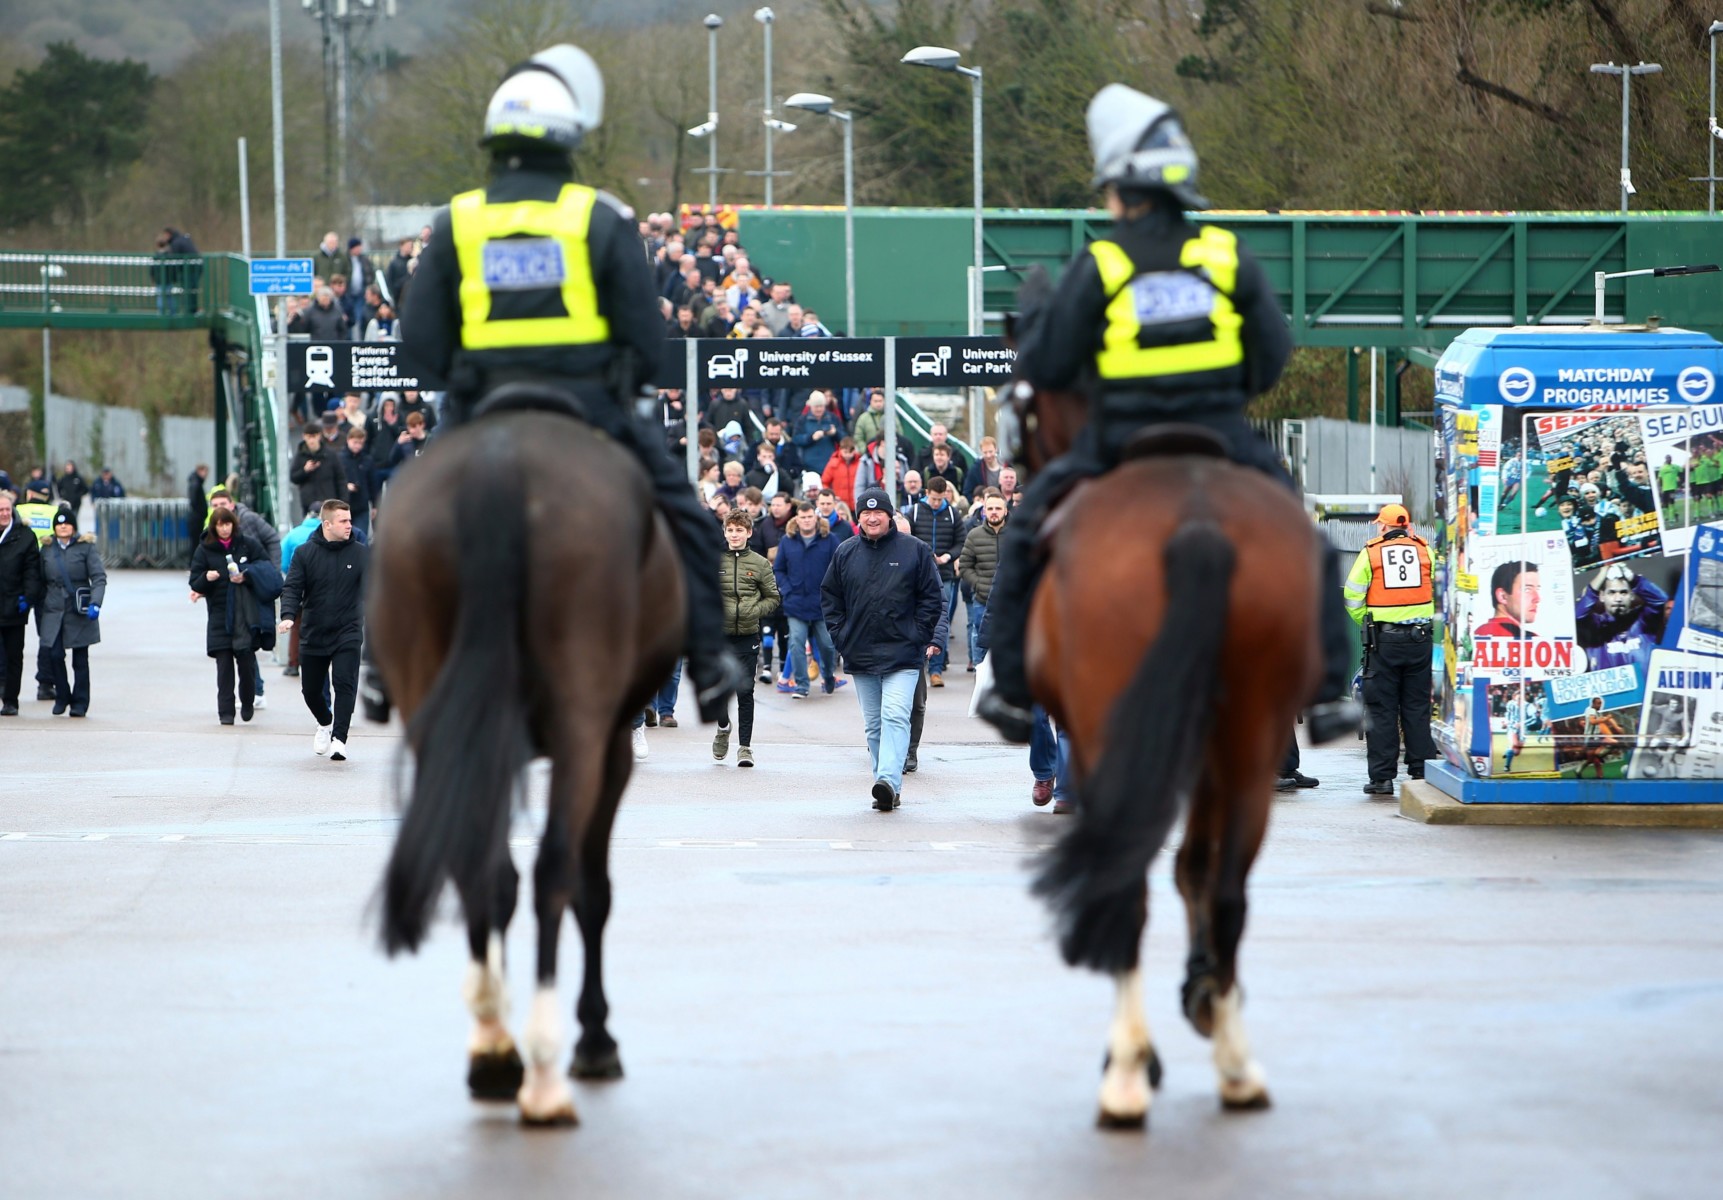 There was a heavy police presence at the Amex Stadium to help control the crowds